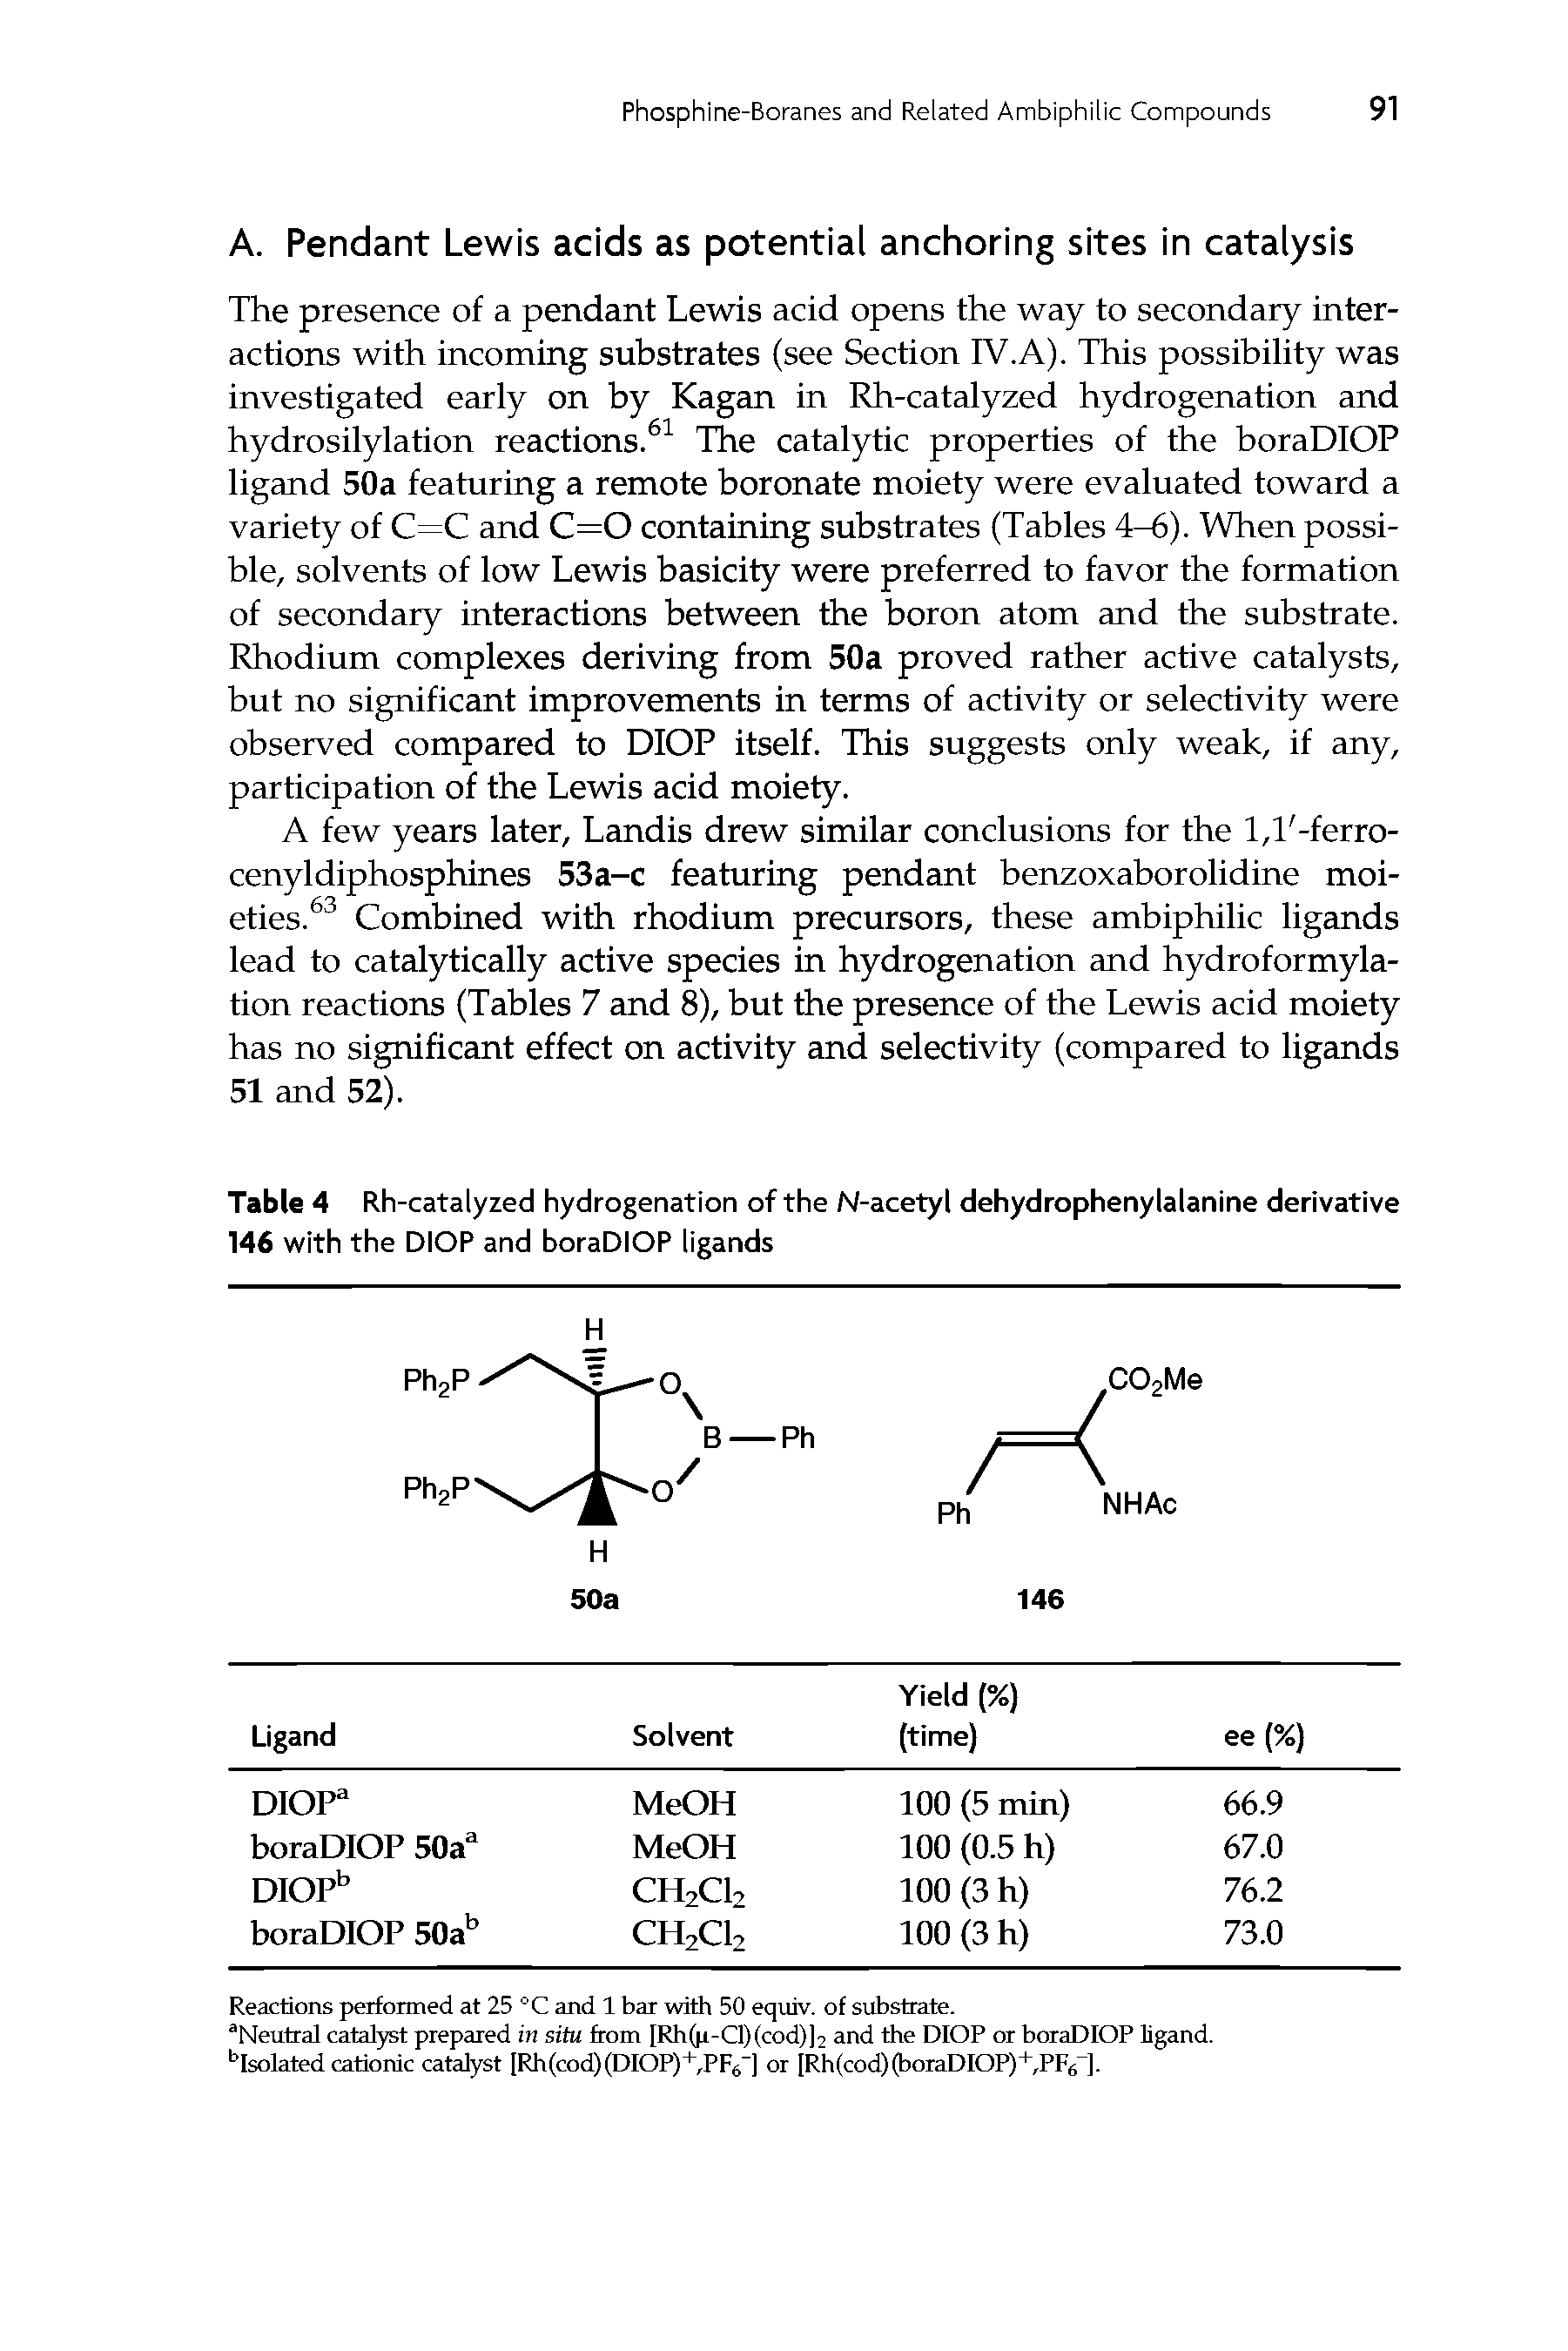 Table 4 Rh-catalyzed hydrogenation of the N-acetyl dehydrophenylalanine derivative 146 with the DIOP and boraDIOP ligands...